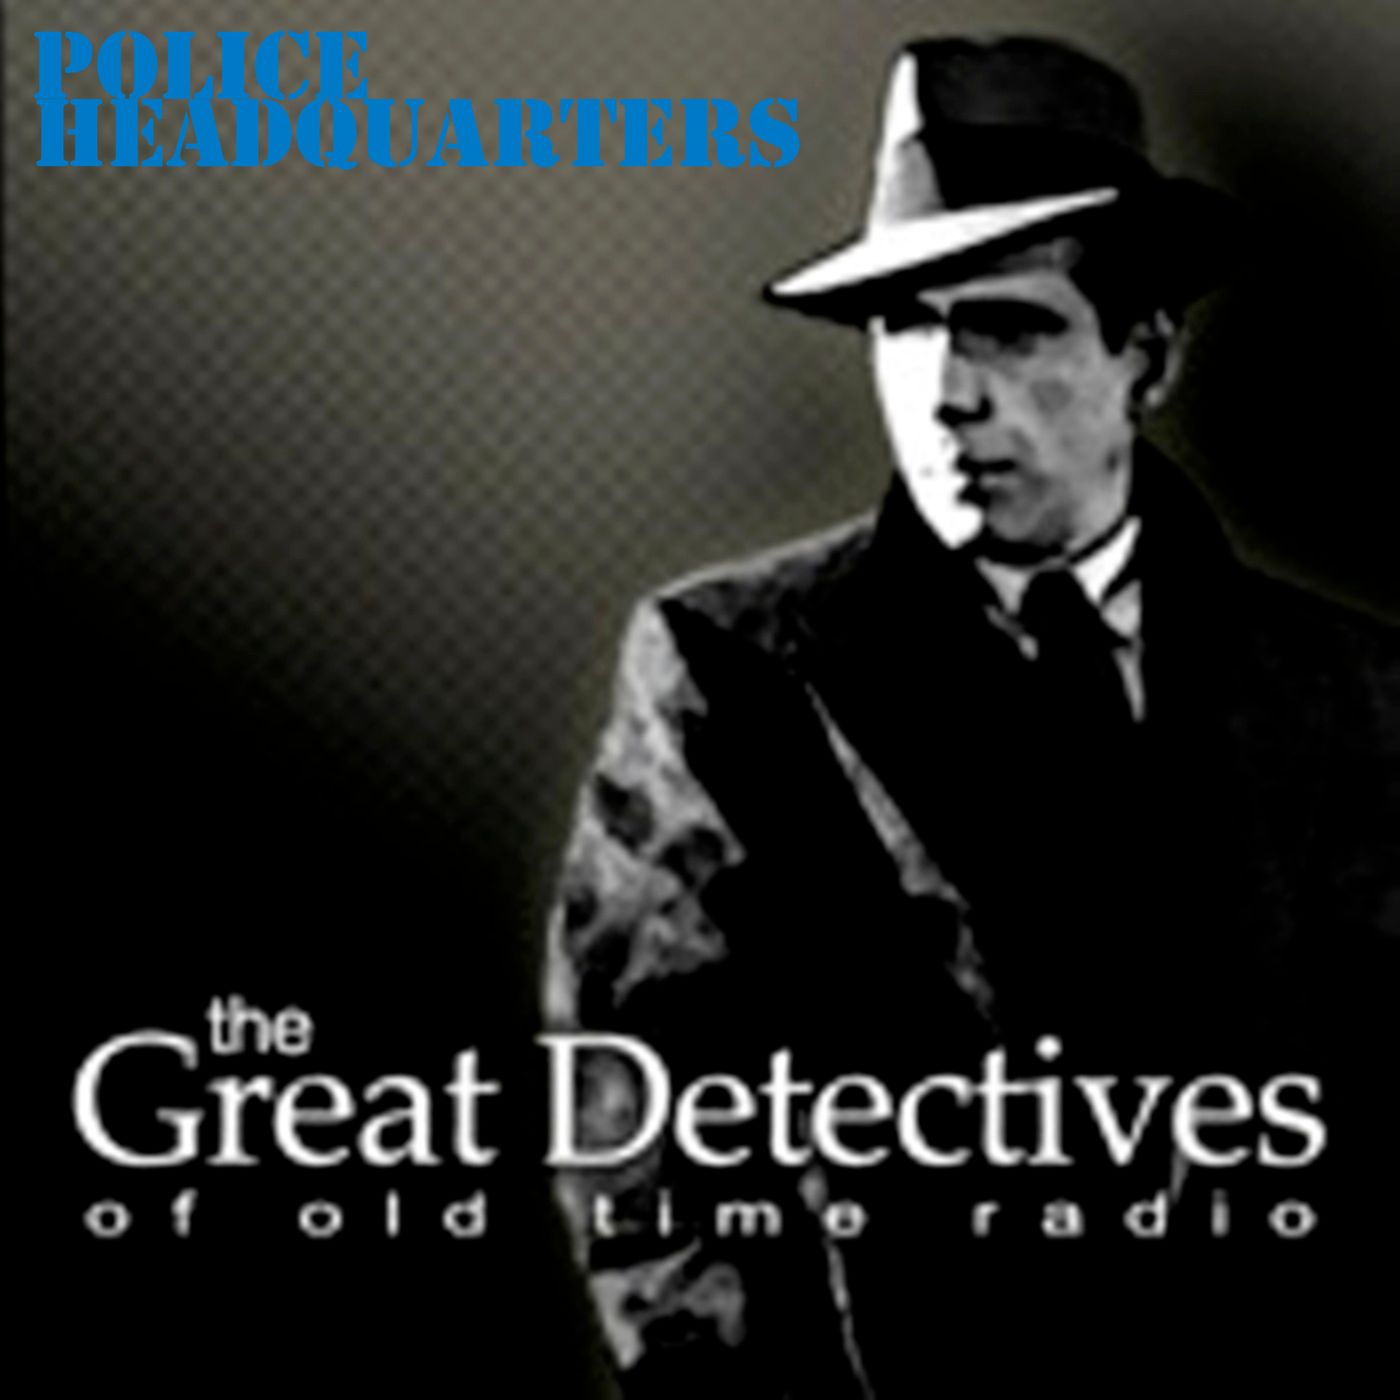 Police Headquarters  – The Great Detectives of Old Time Radio